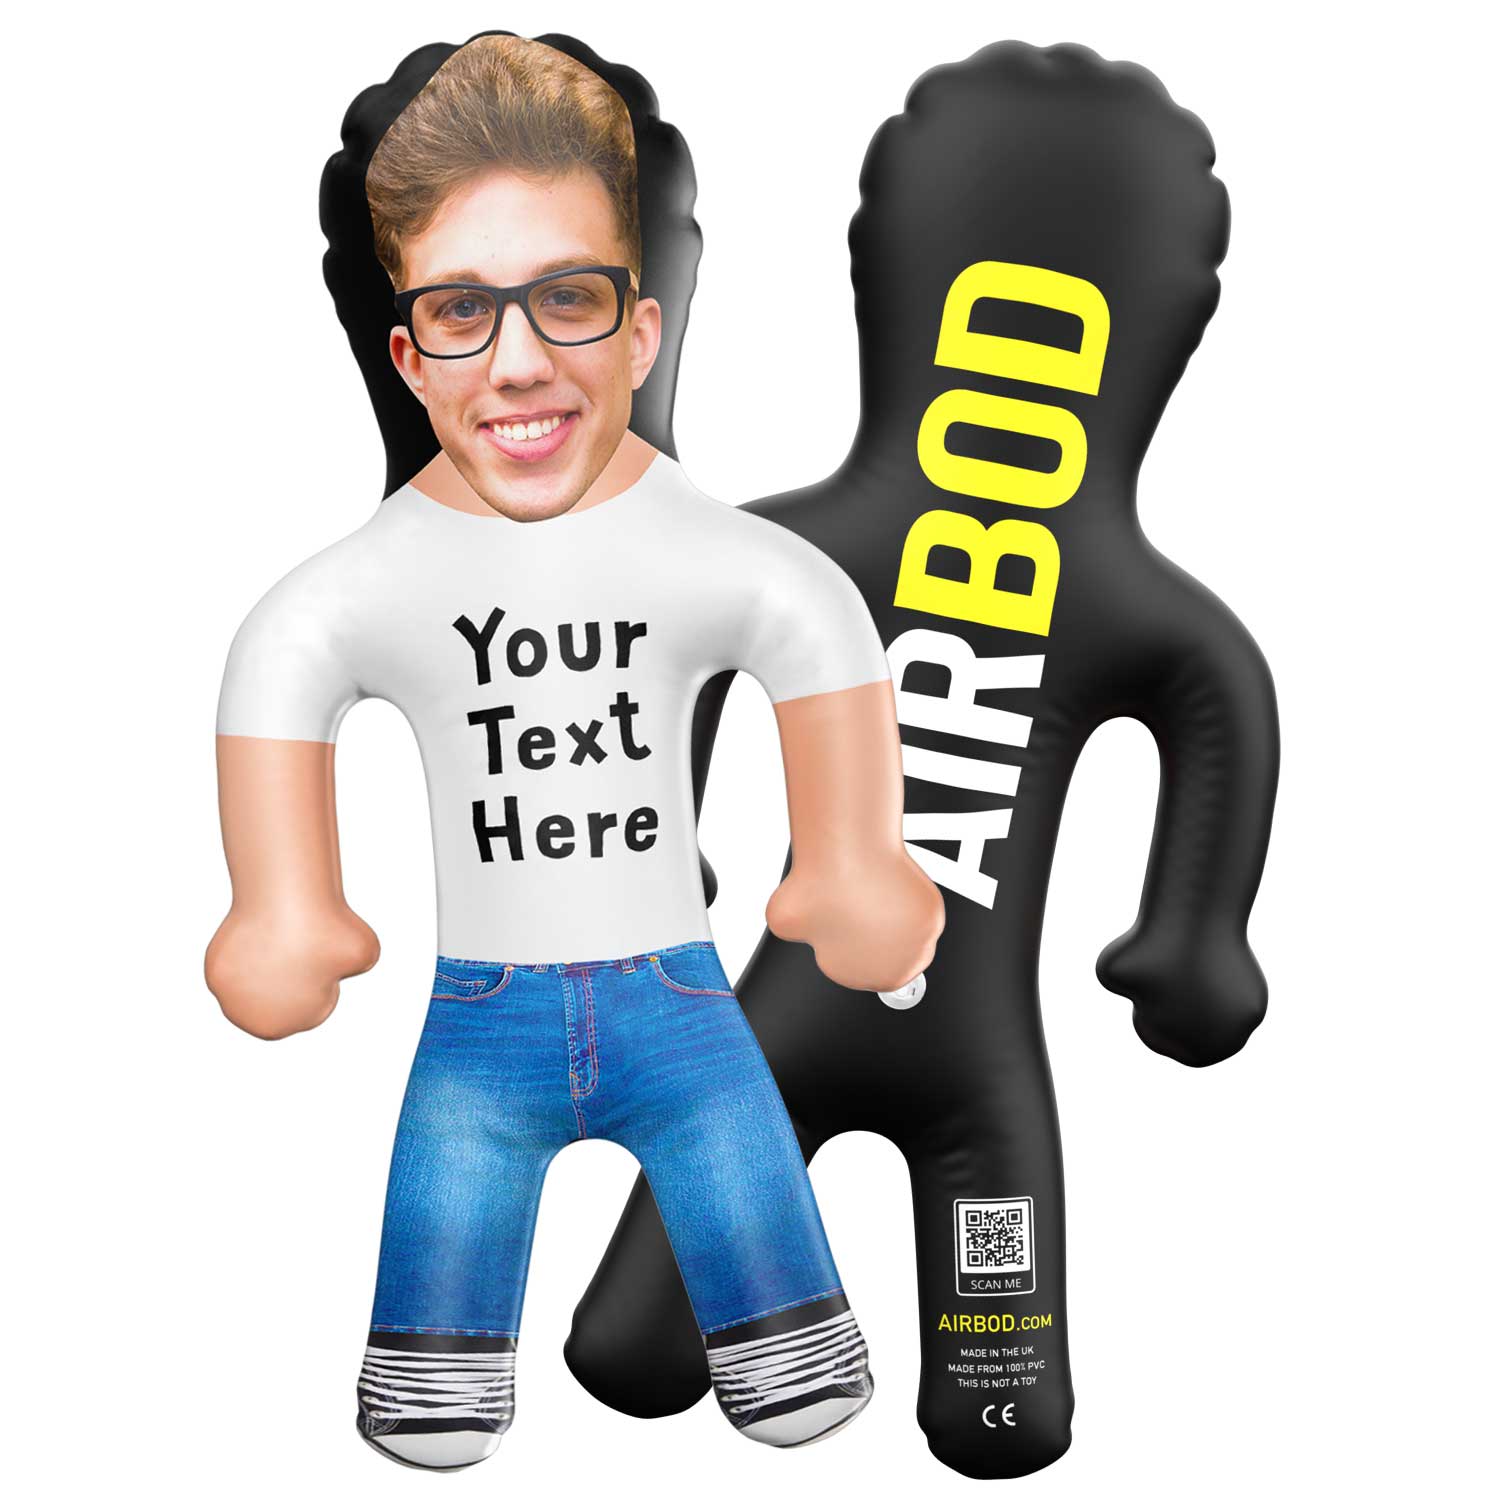 *Your Message Here* T-Shirt Blow Up Doll